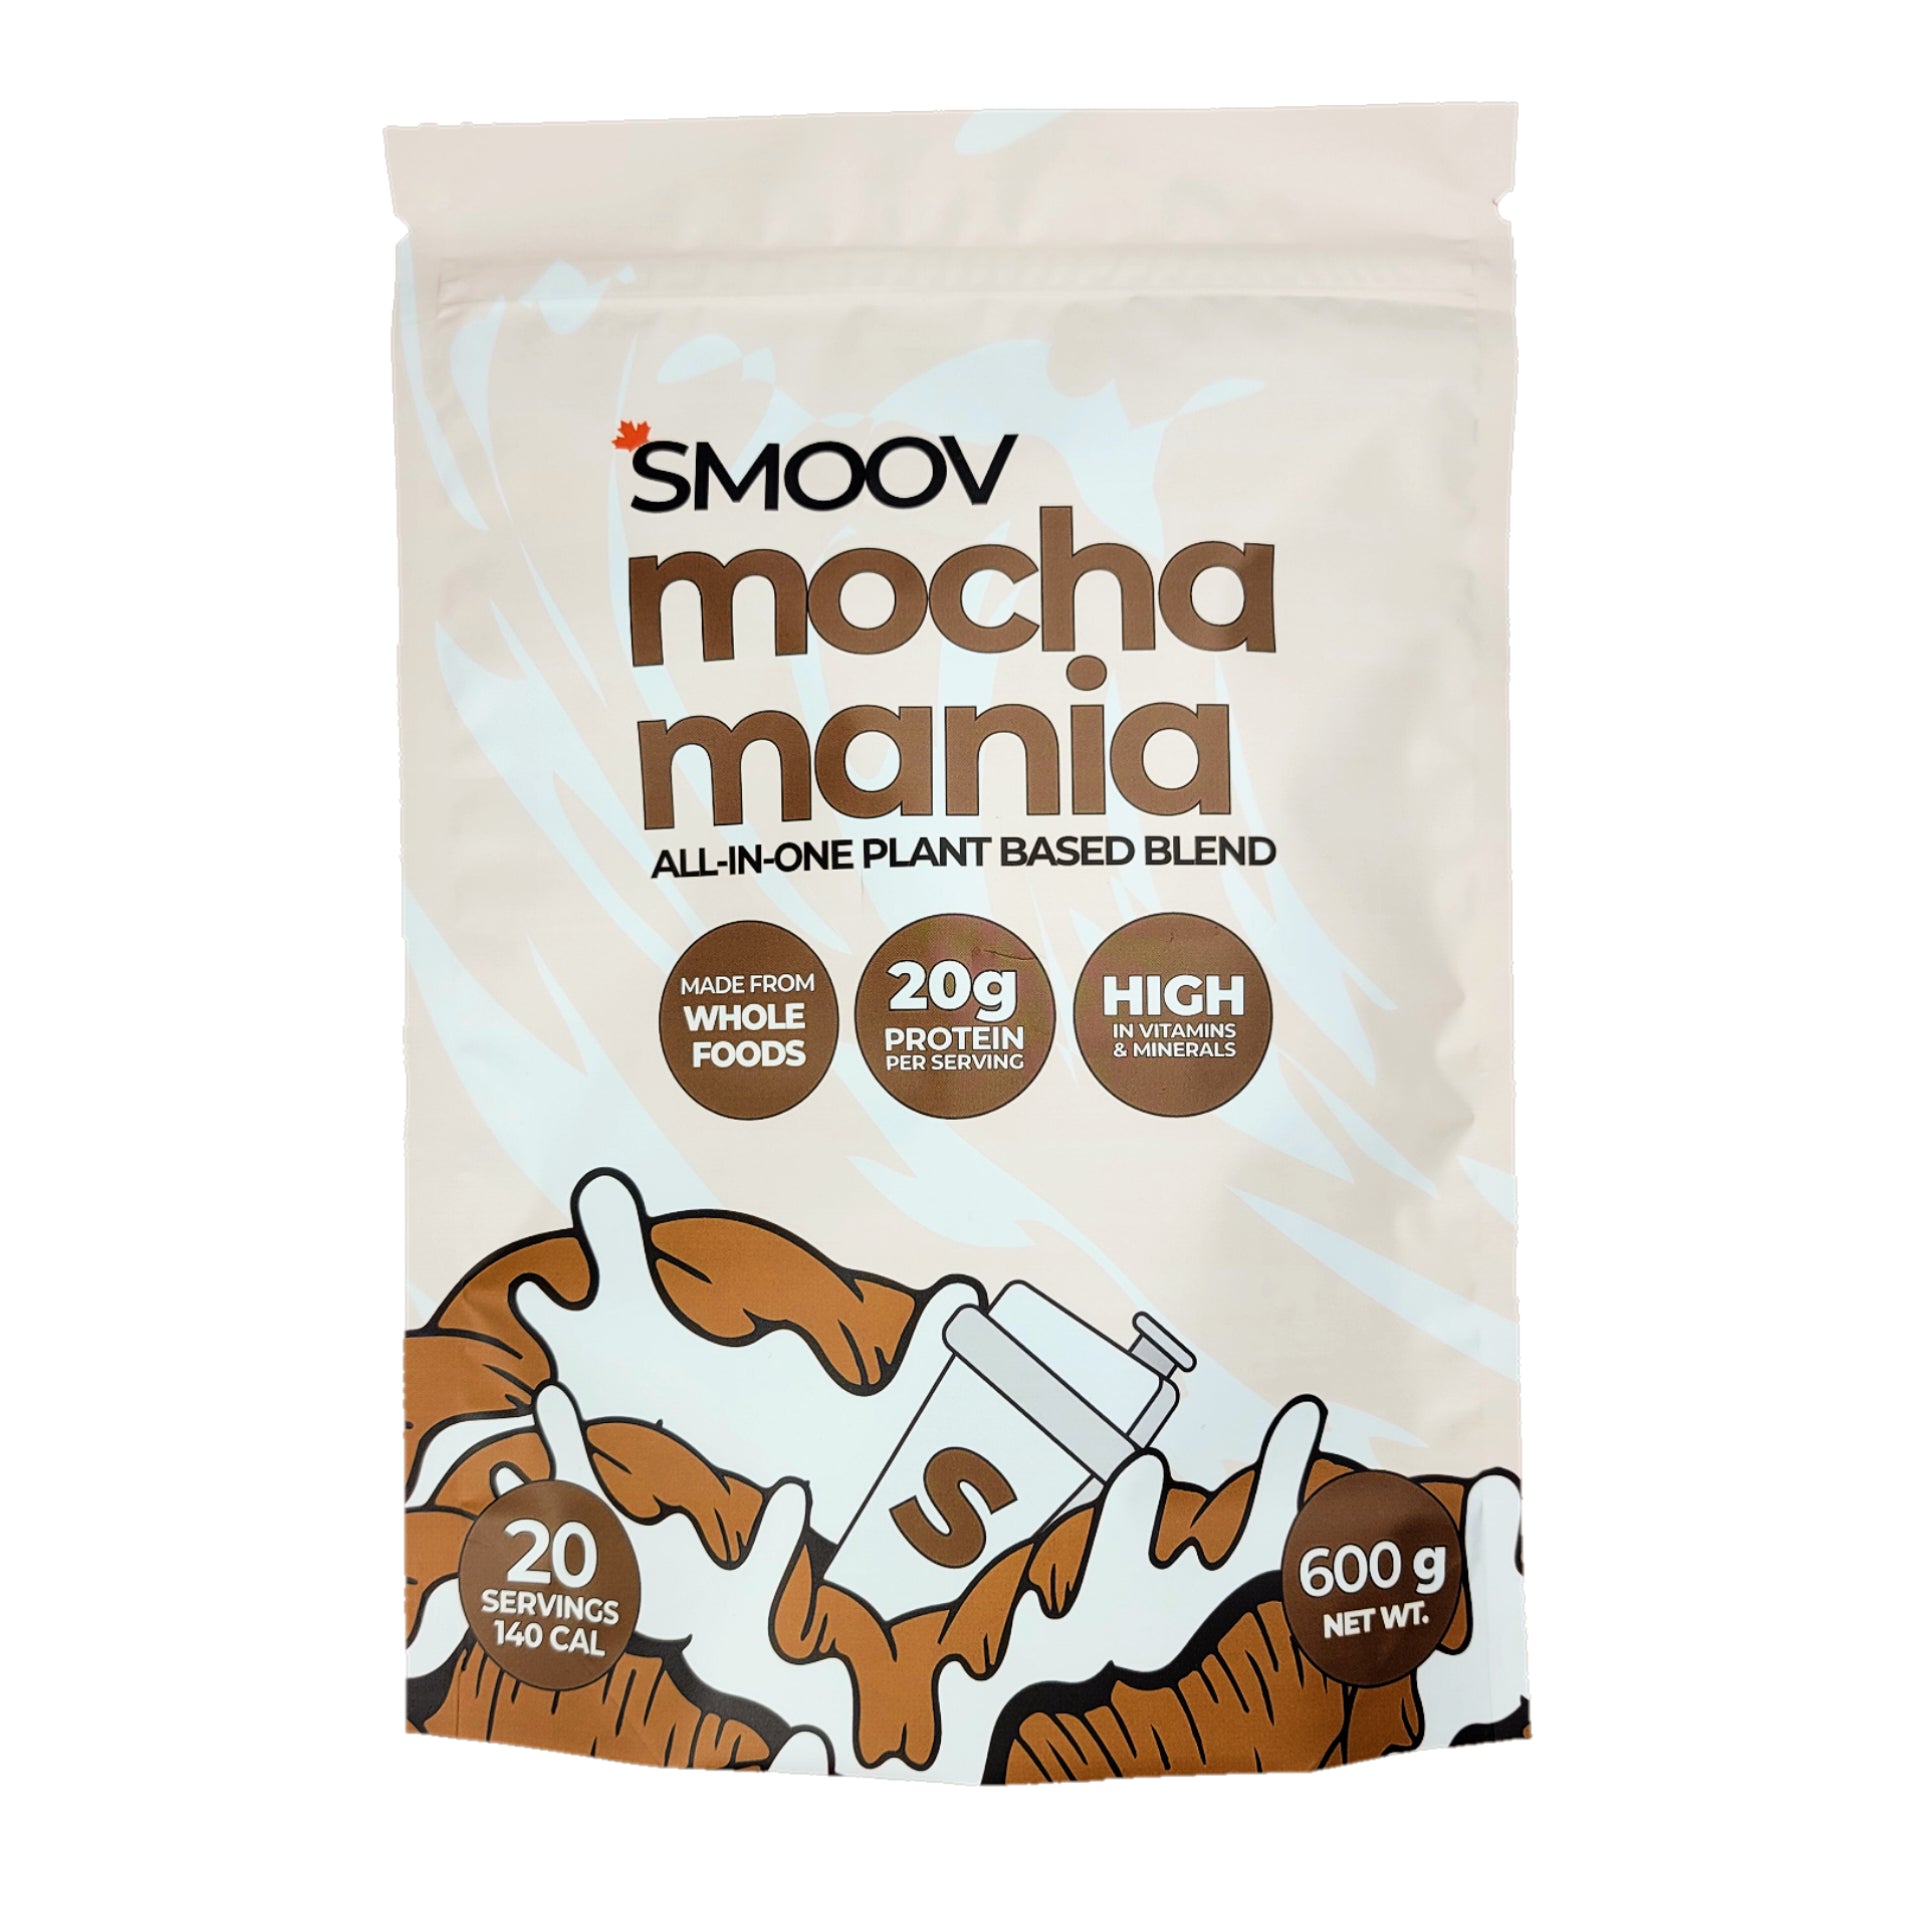 This is the healthy love child of coffee & chocolate. Say goodbye to boring plant based shakes. And bid farewell to those bombarded with stevia. Kickstart your day with 20g of protein from peas & beans, omegas from seeds and vitamins & minerals from freeze dried fruits, veggies & superfoods. This blend puts the fun in function. 